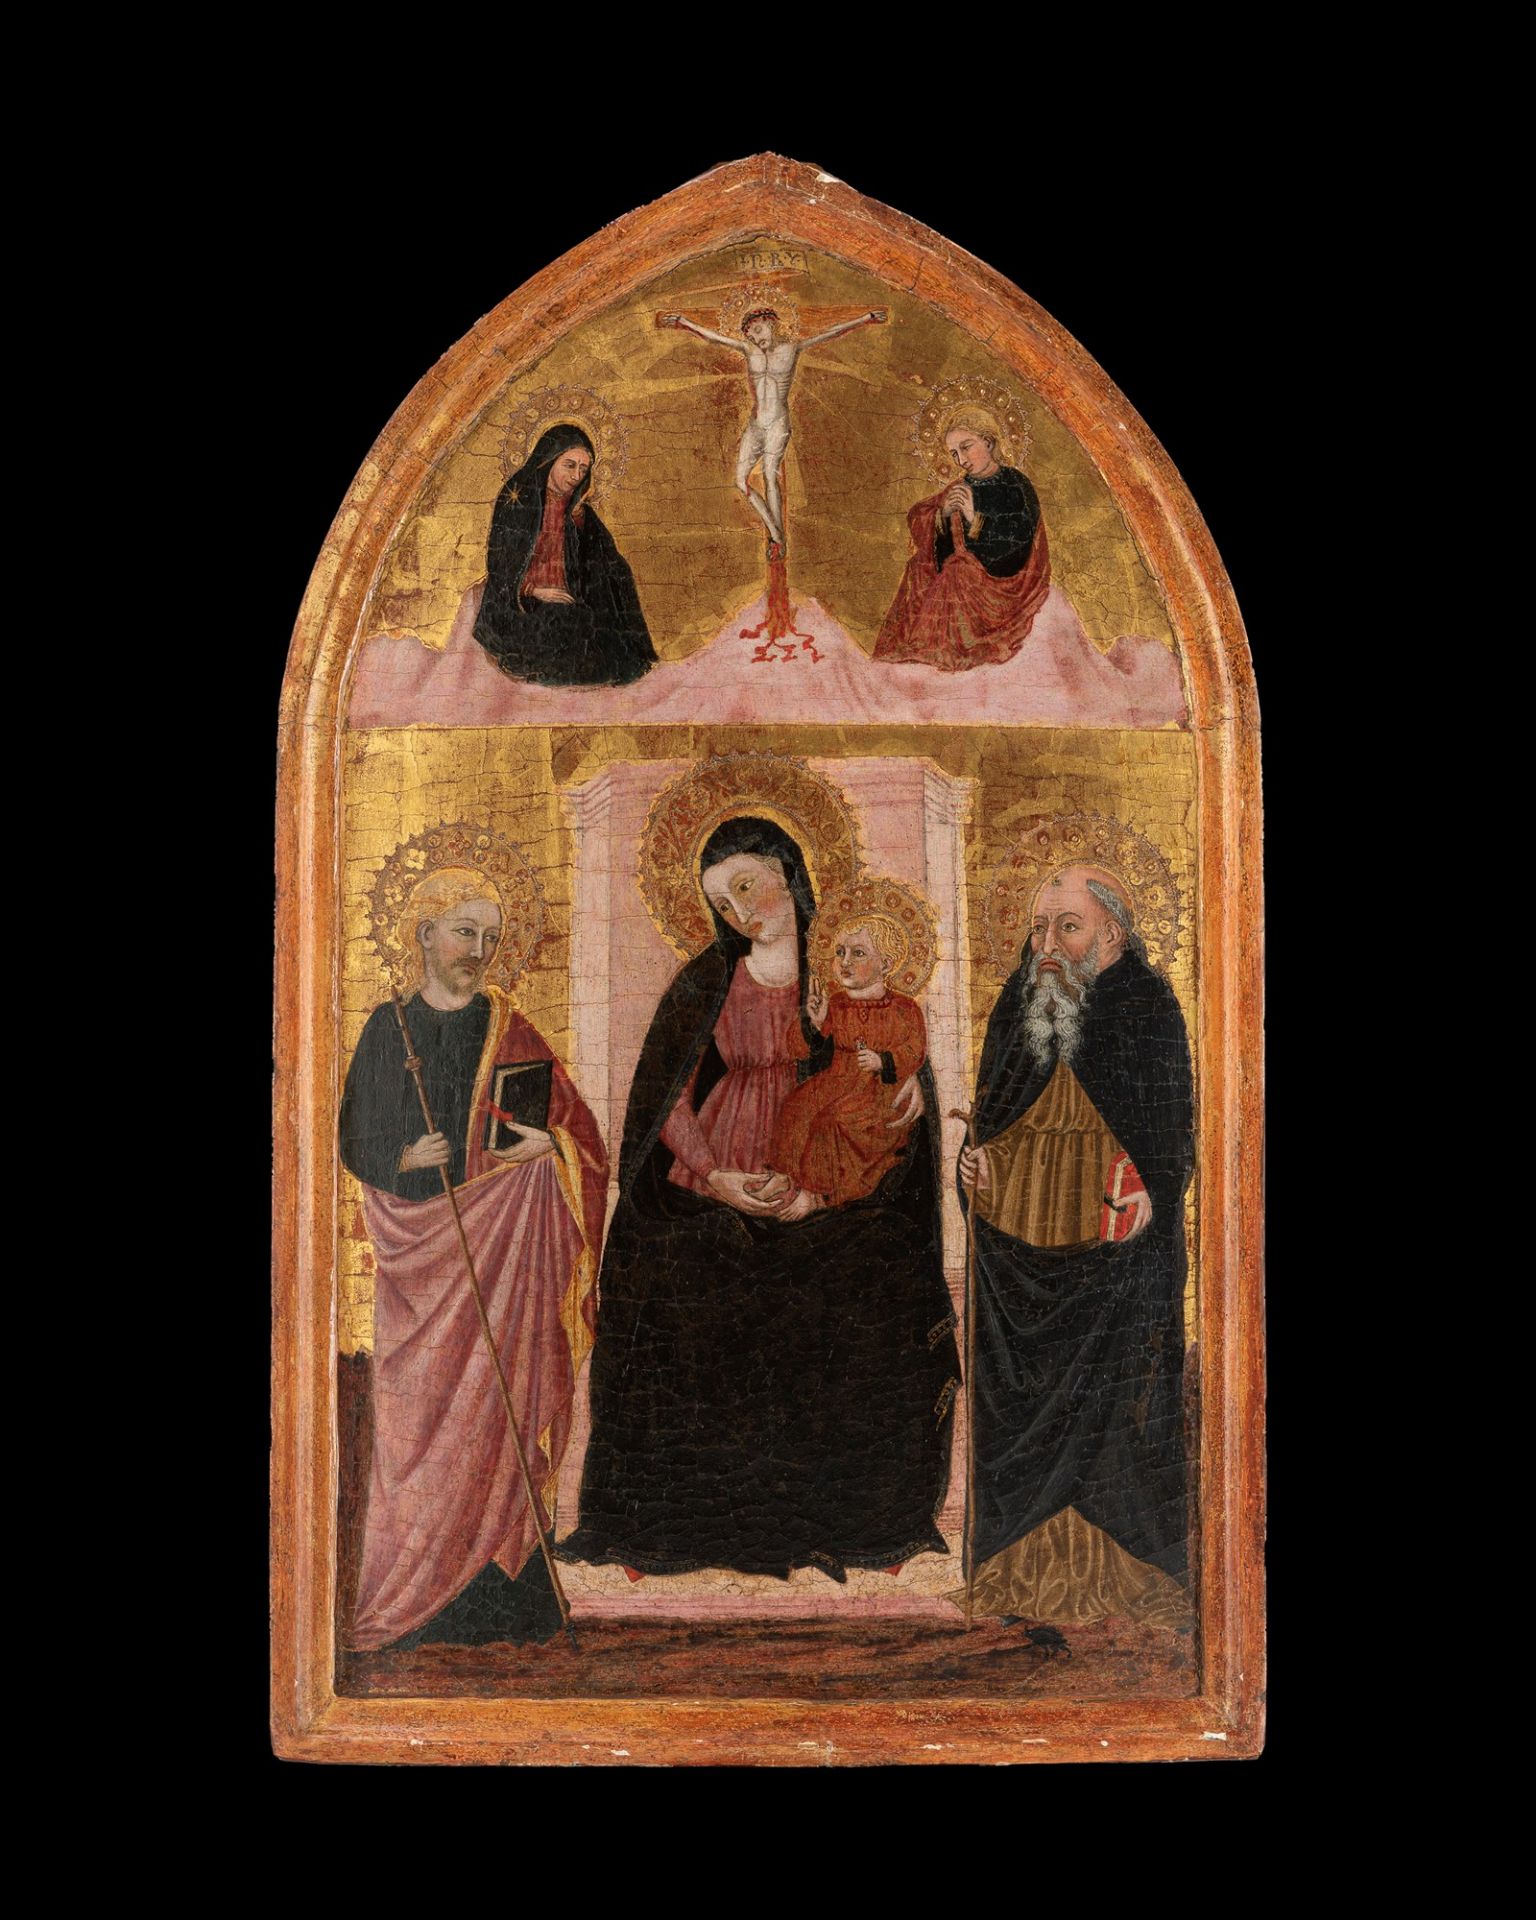 Tuscan school, end of the fourteenth century - beginning of the fifteenth century - Virgin and Child